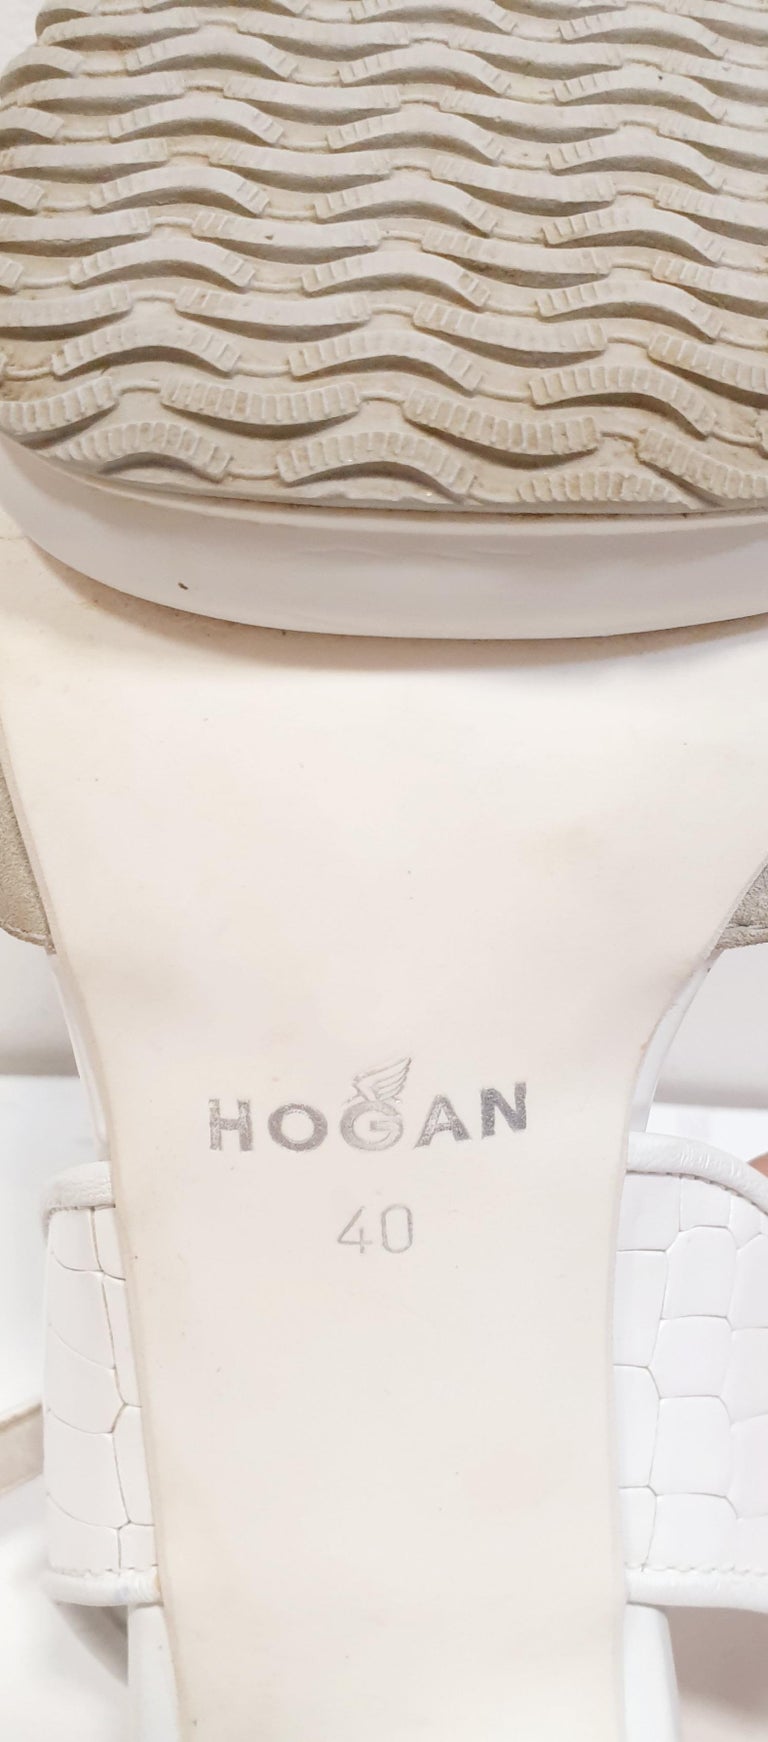 Hogan Leather and Suede White Sandals For Sale 3